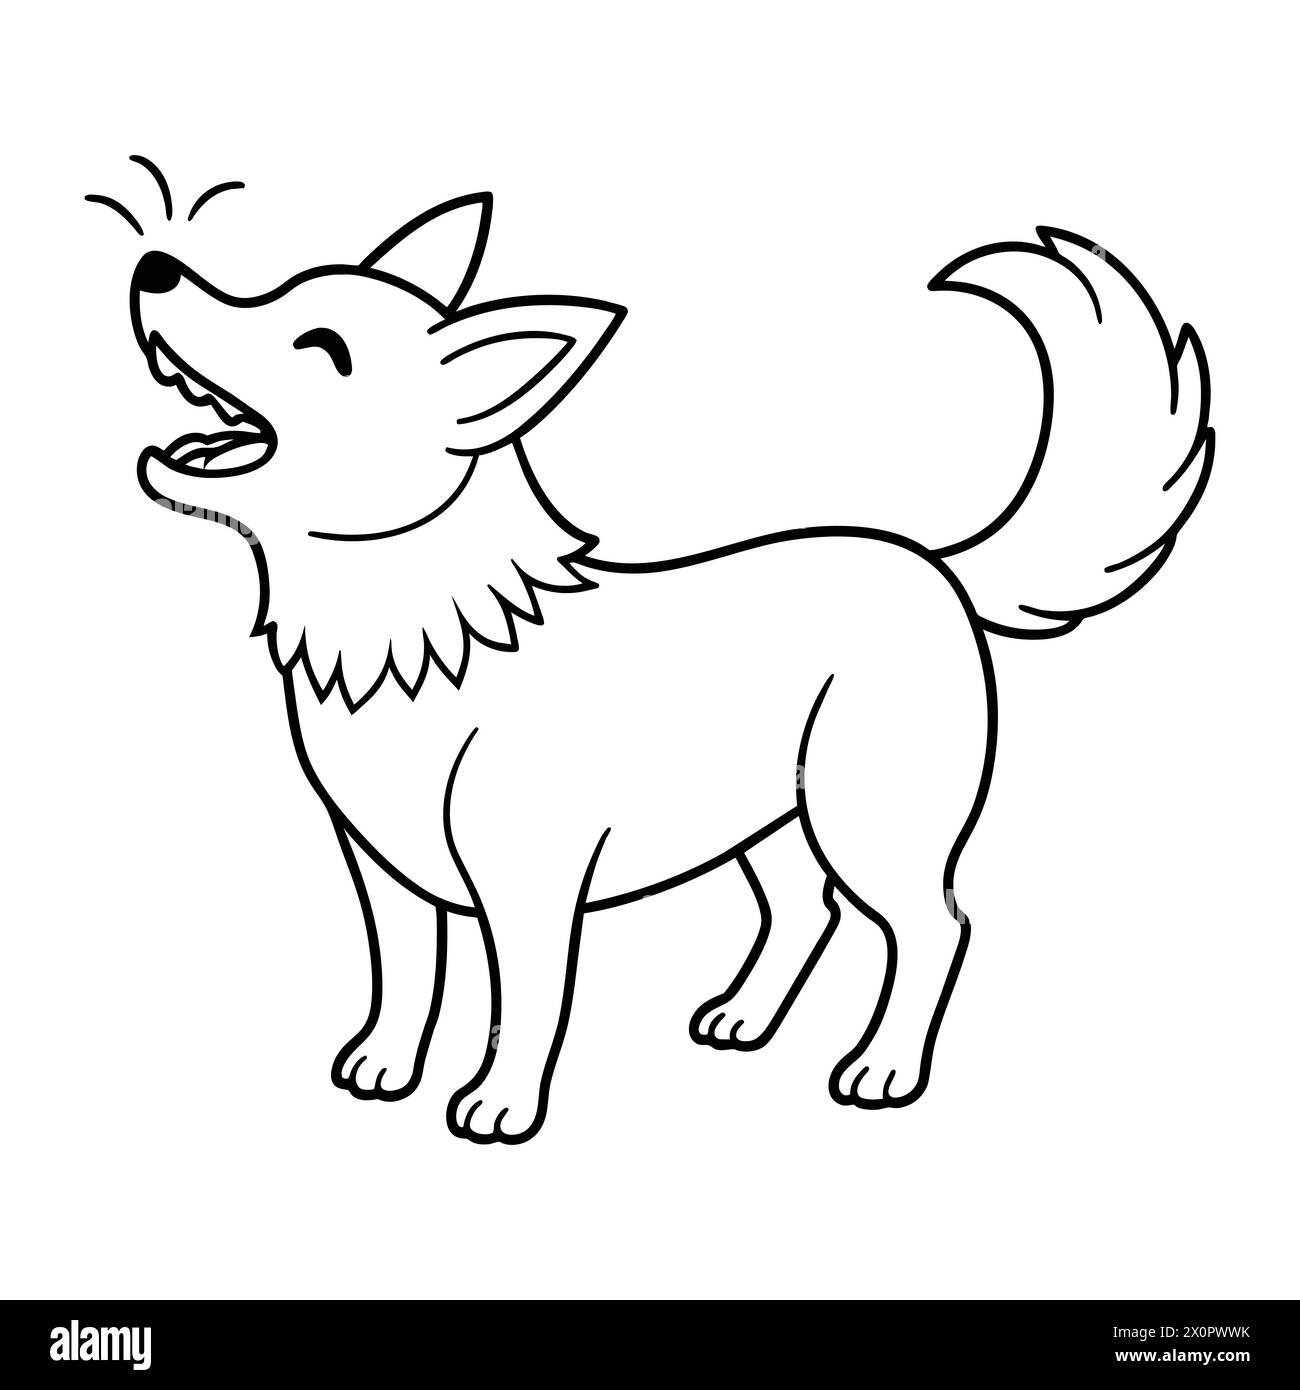 Simple RataThe little dog suddenly started barking loudly,'Adorable Little Dog Alert: Cute Puppy Barking with Vigor - High-Quality Image for Any Pet Stock Vector